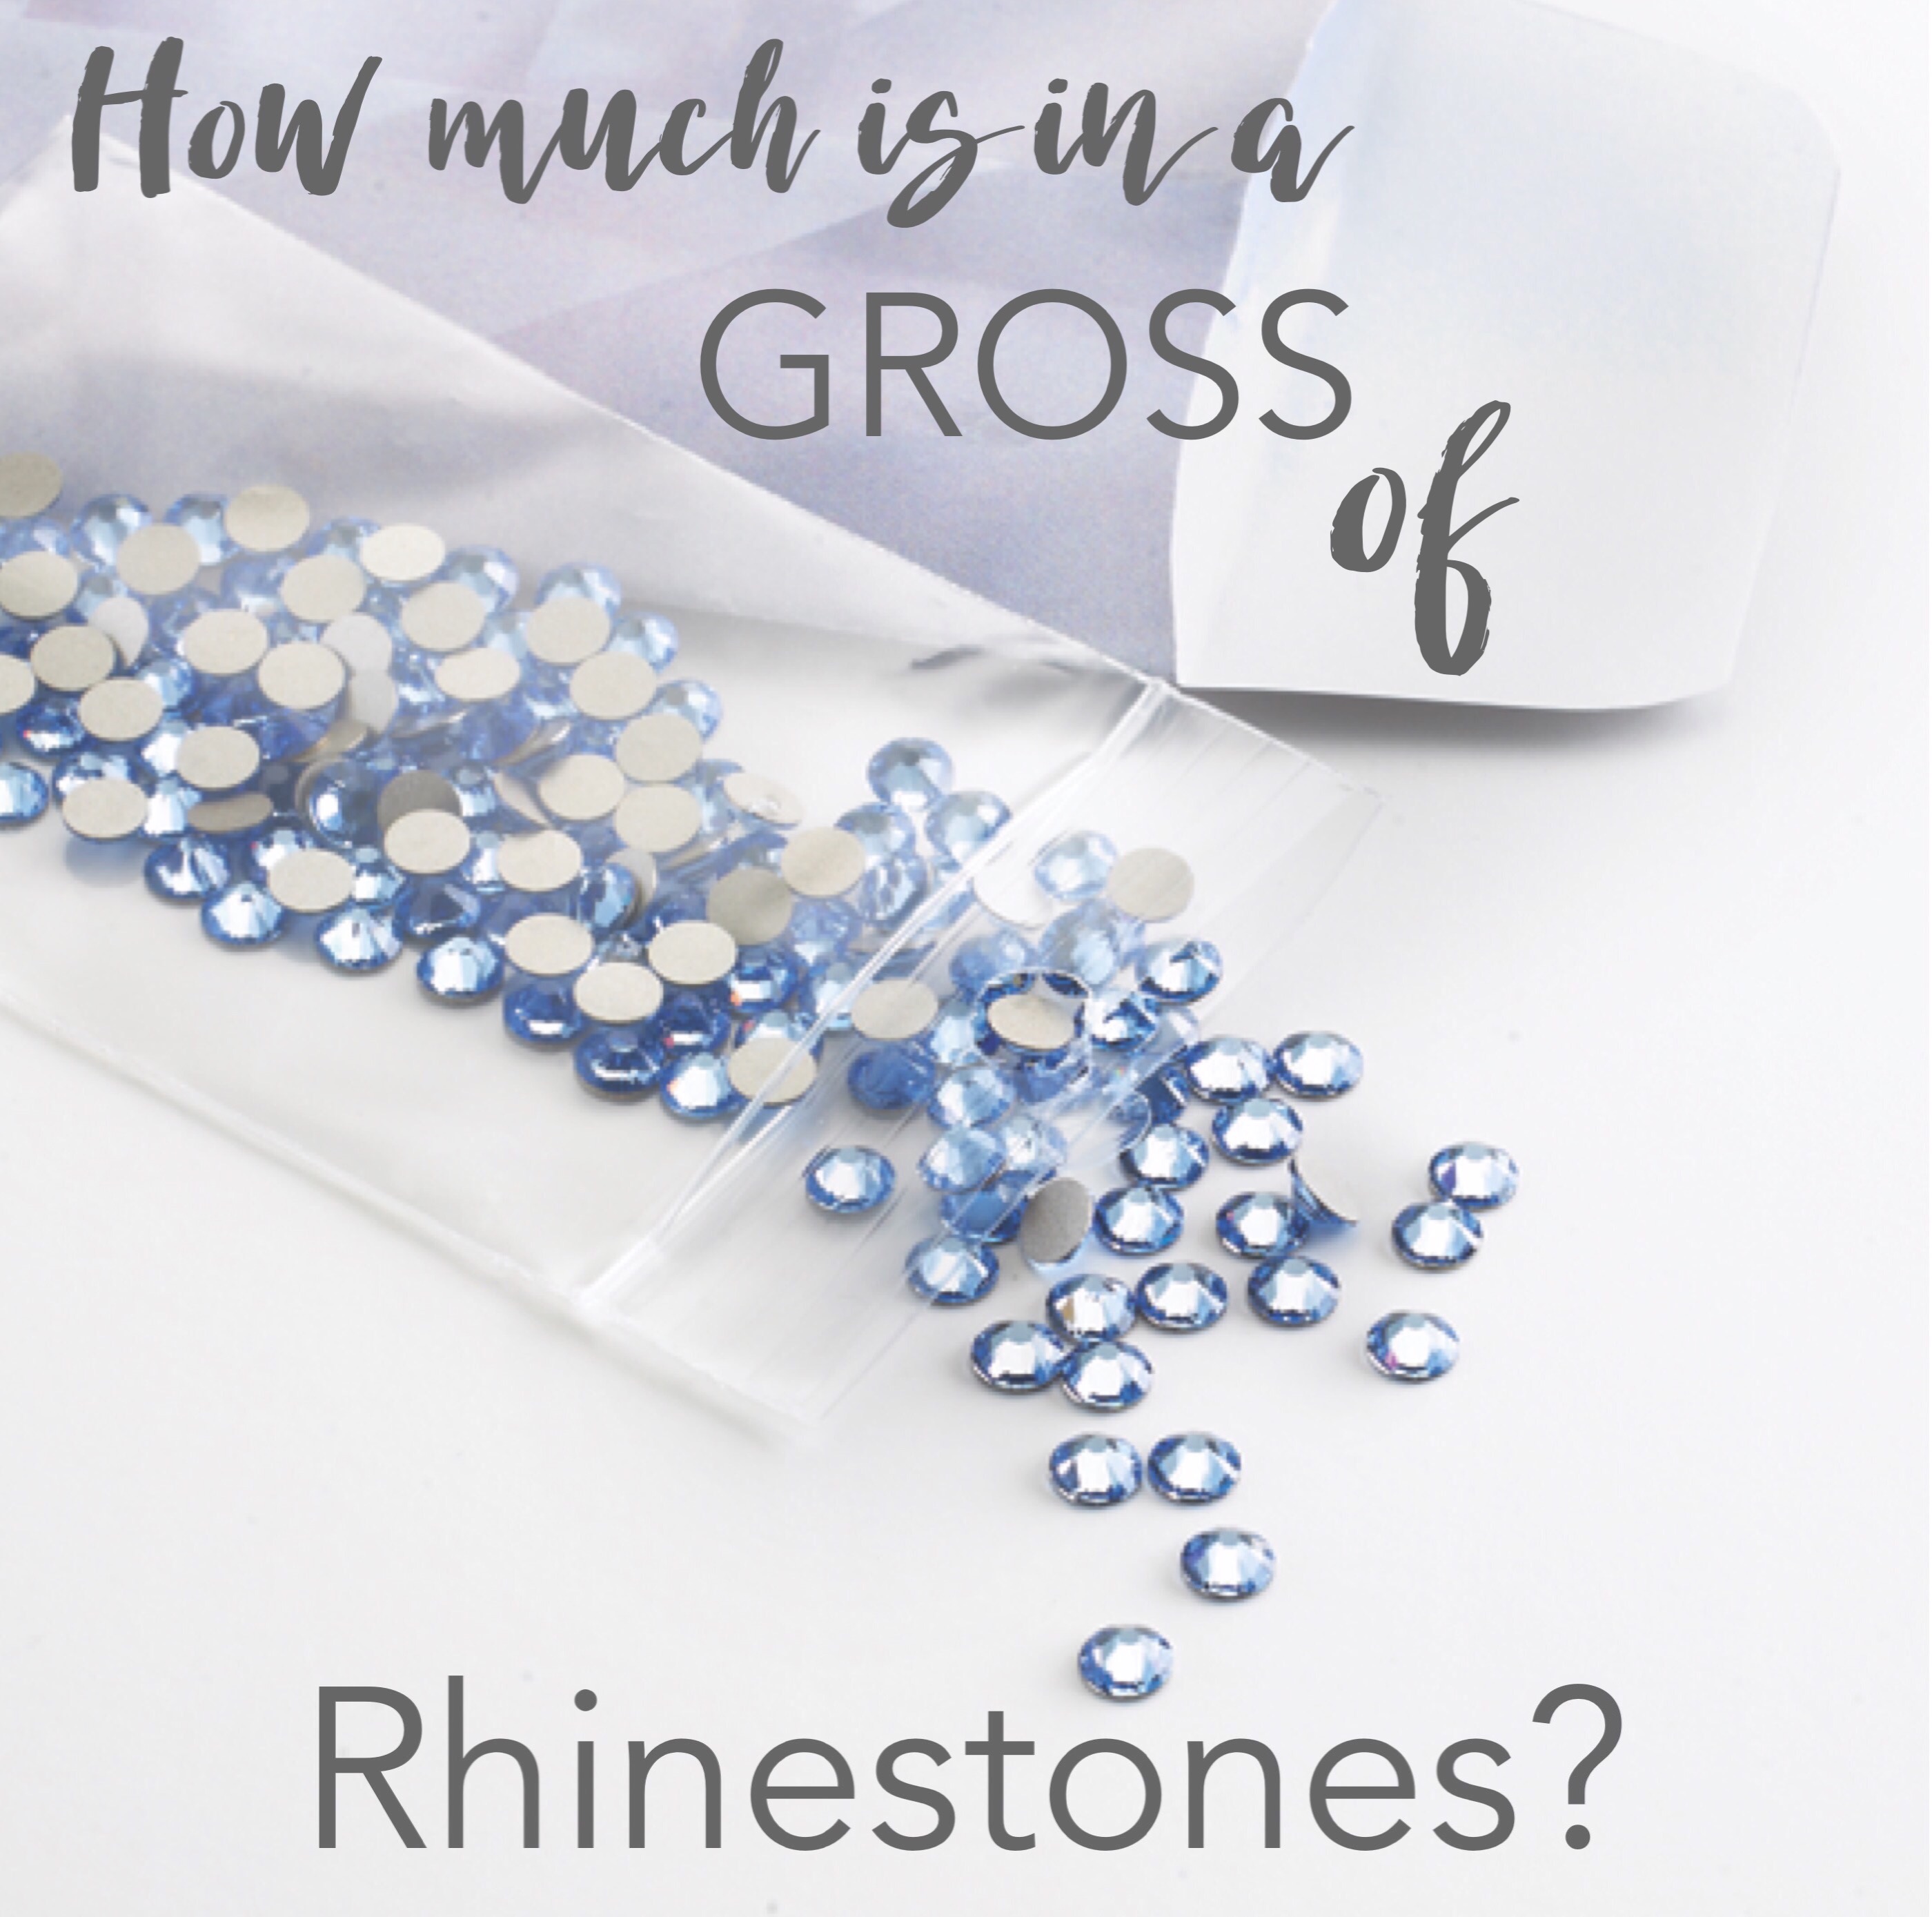 How much is in a gross of rhinestones